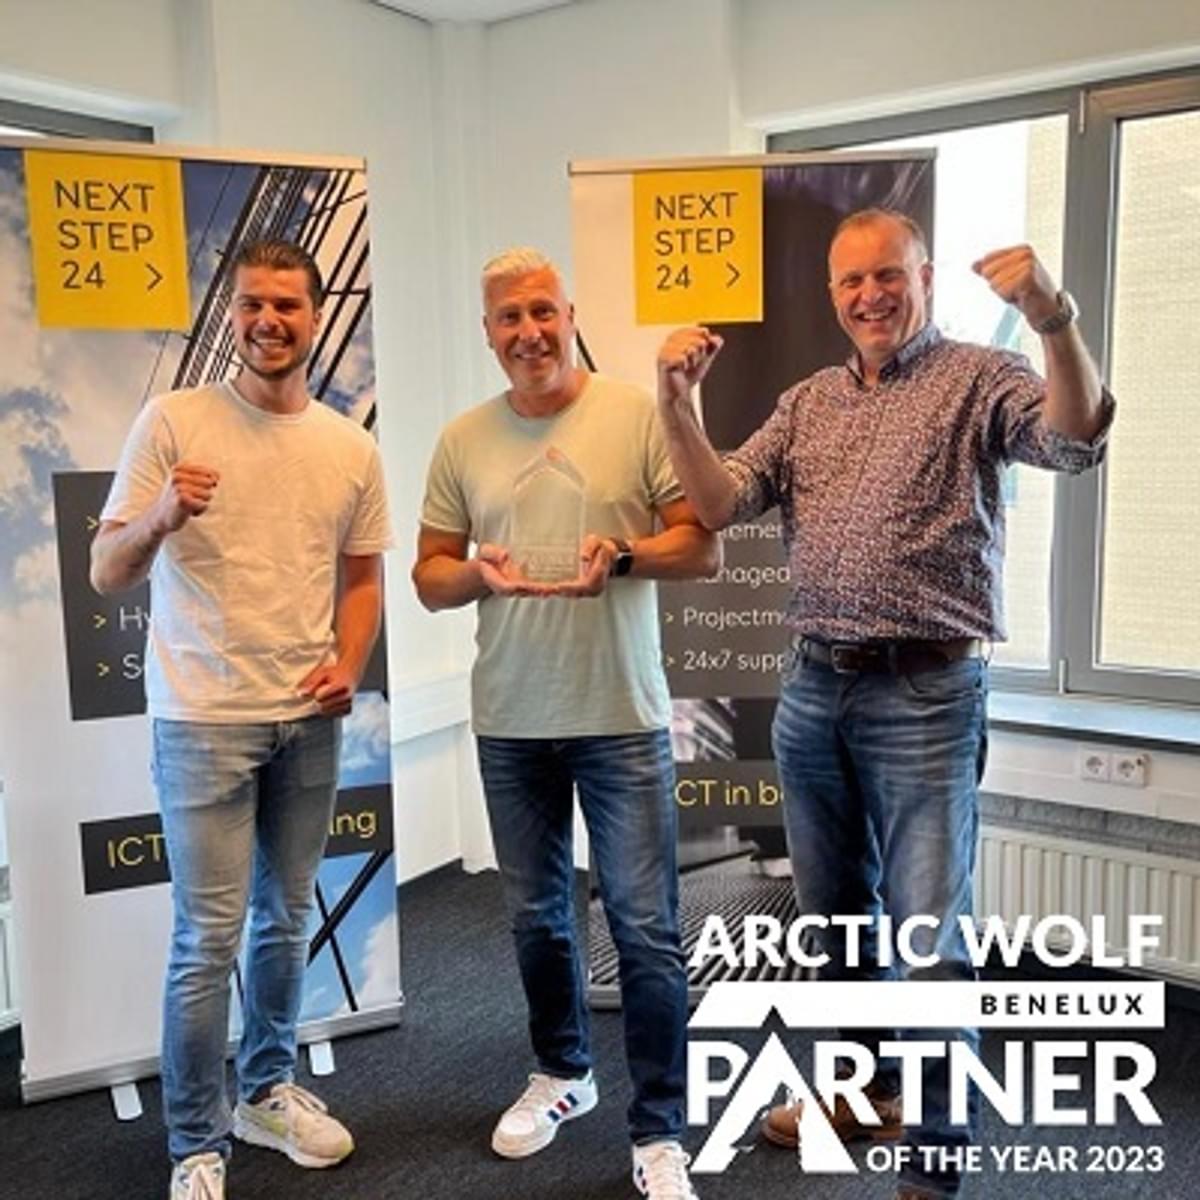 NextStep24 is Arctic Wolf Benelux Partner of the Year 2023 image